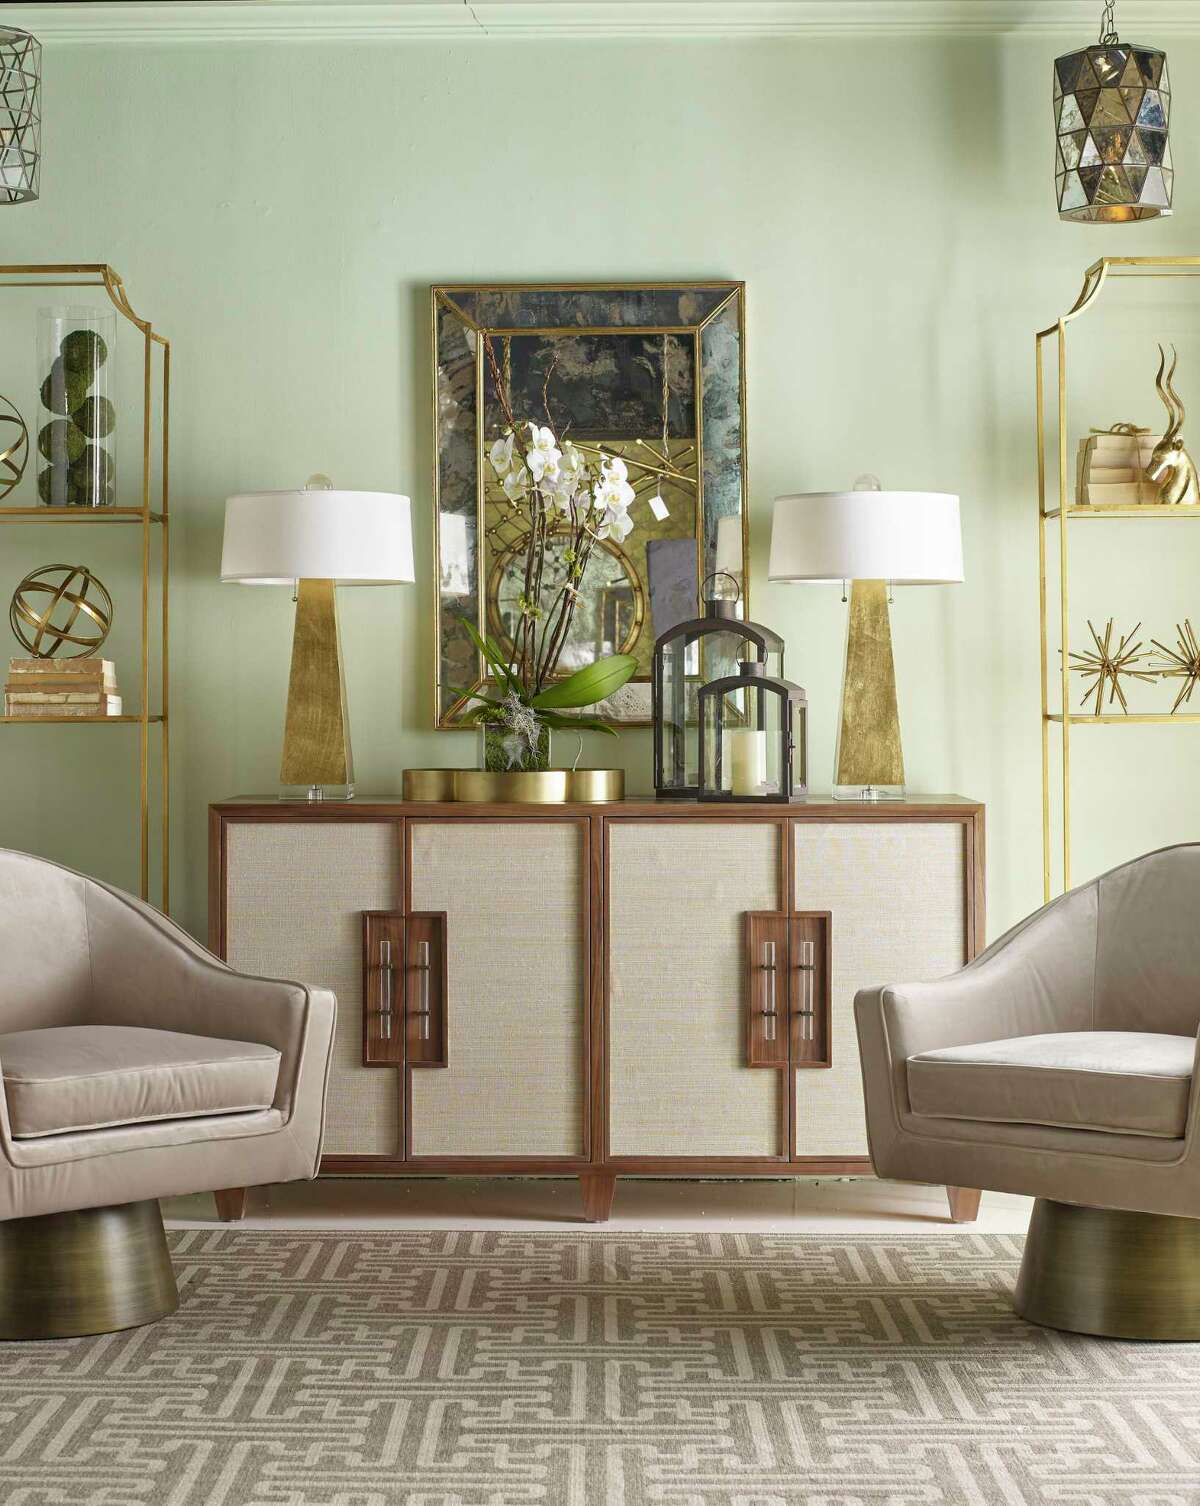 The Clark console by Worlds Away includes caning details on its doors. It was part of new collections shown at the Fall 2019 High Point Market.